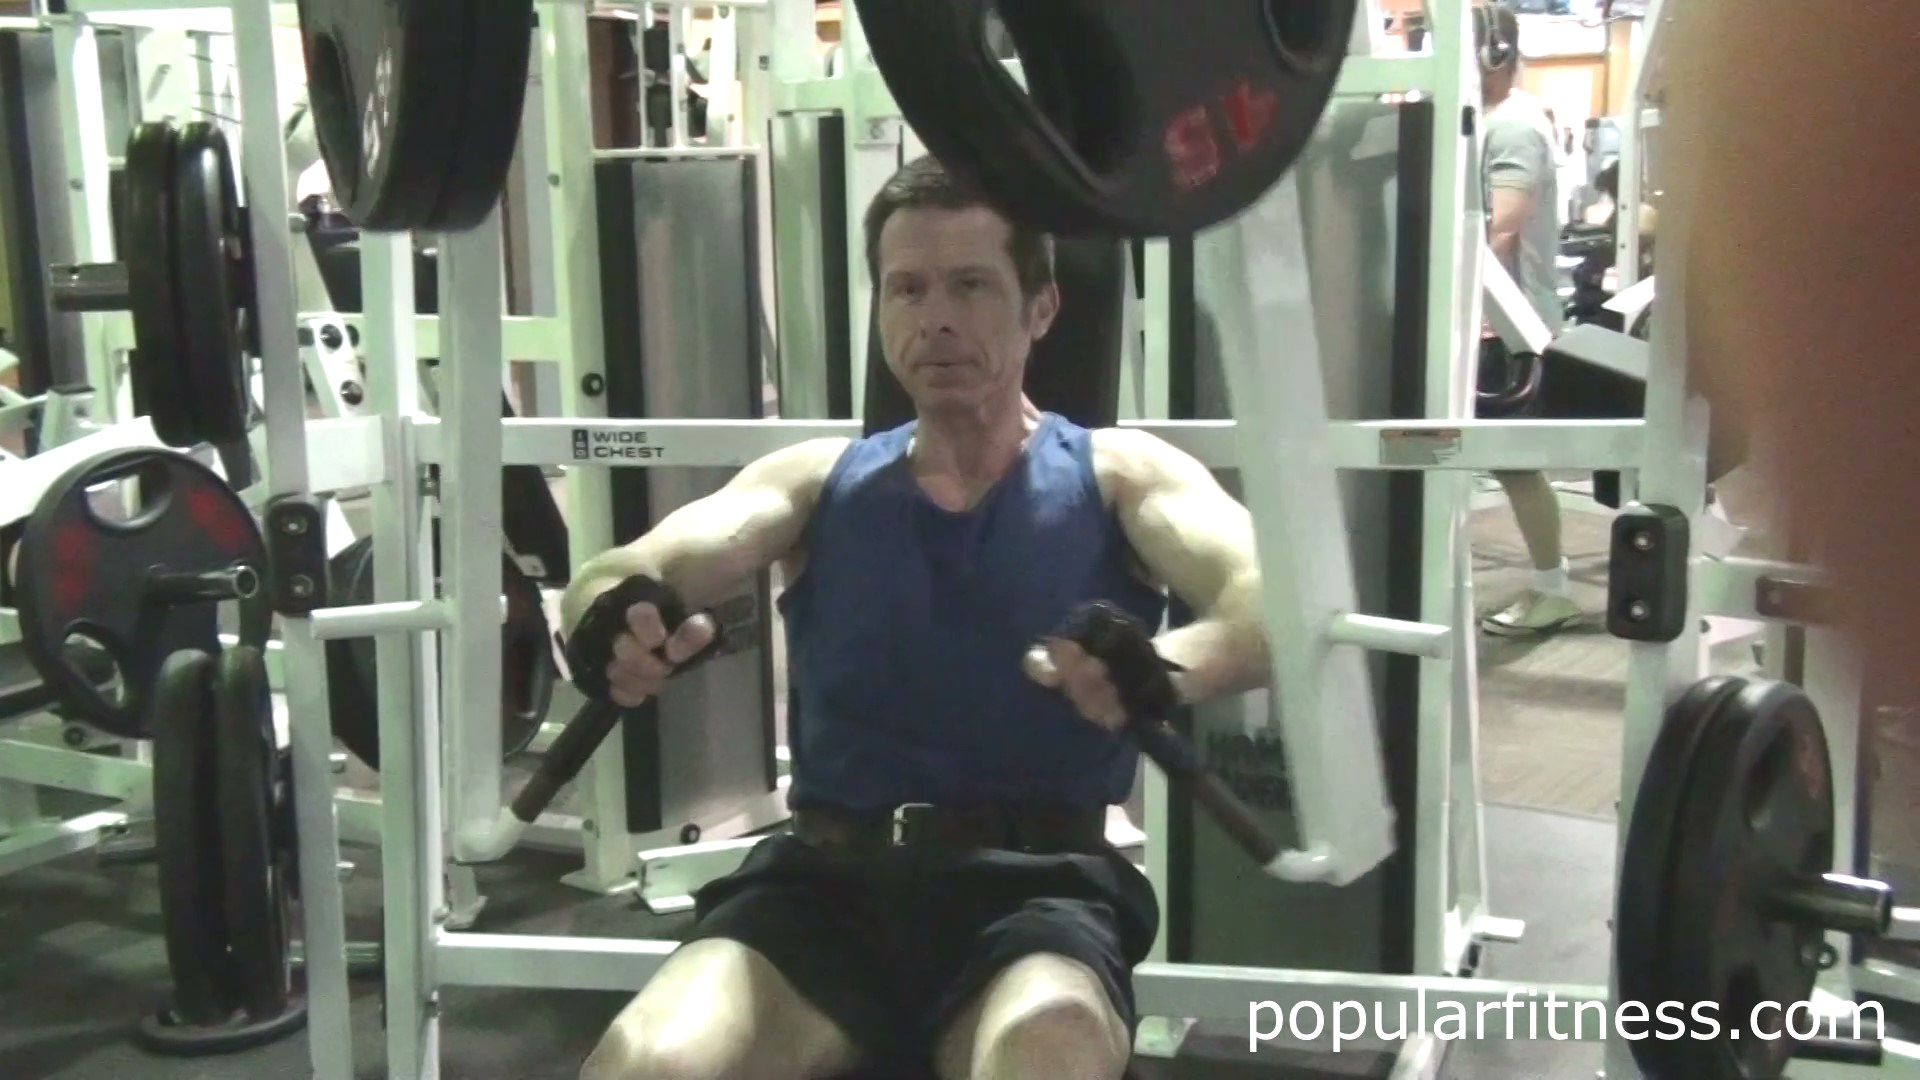 Wide chest press exercising using the Hammer Strength Machine - photo by popular fitness